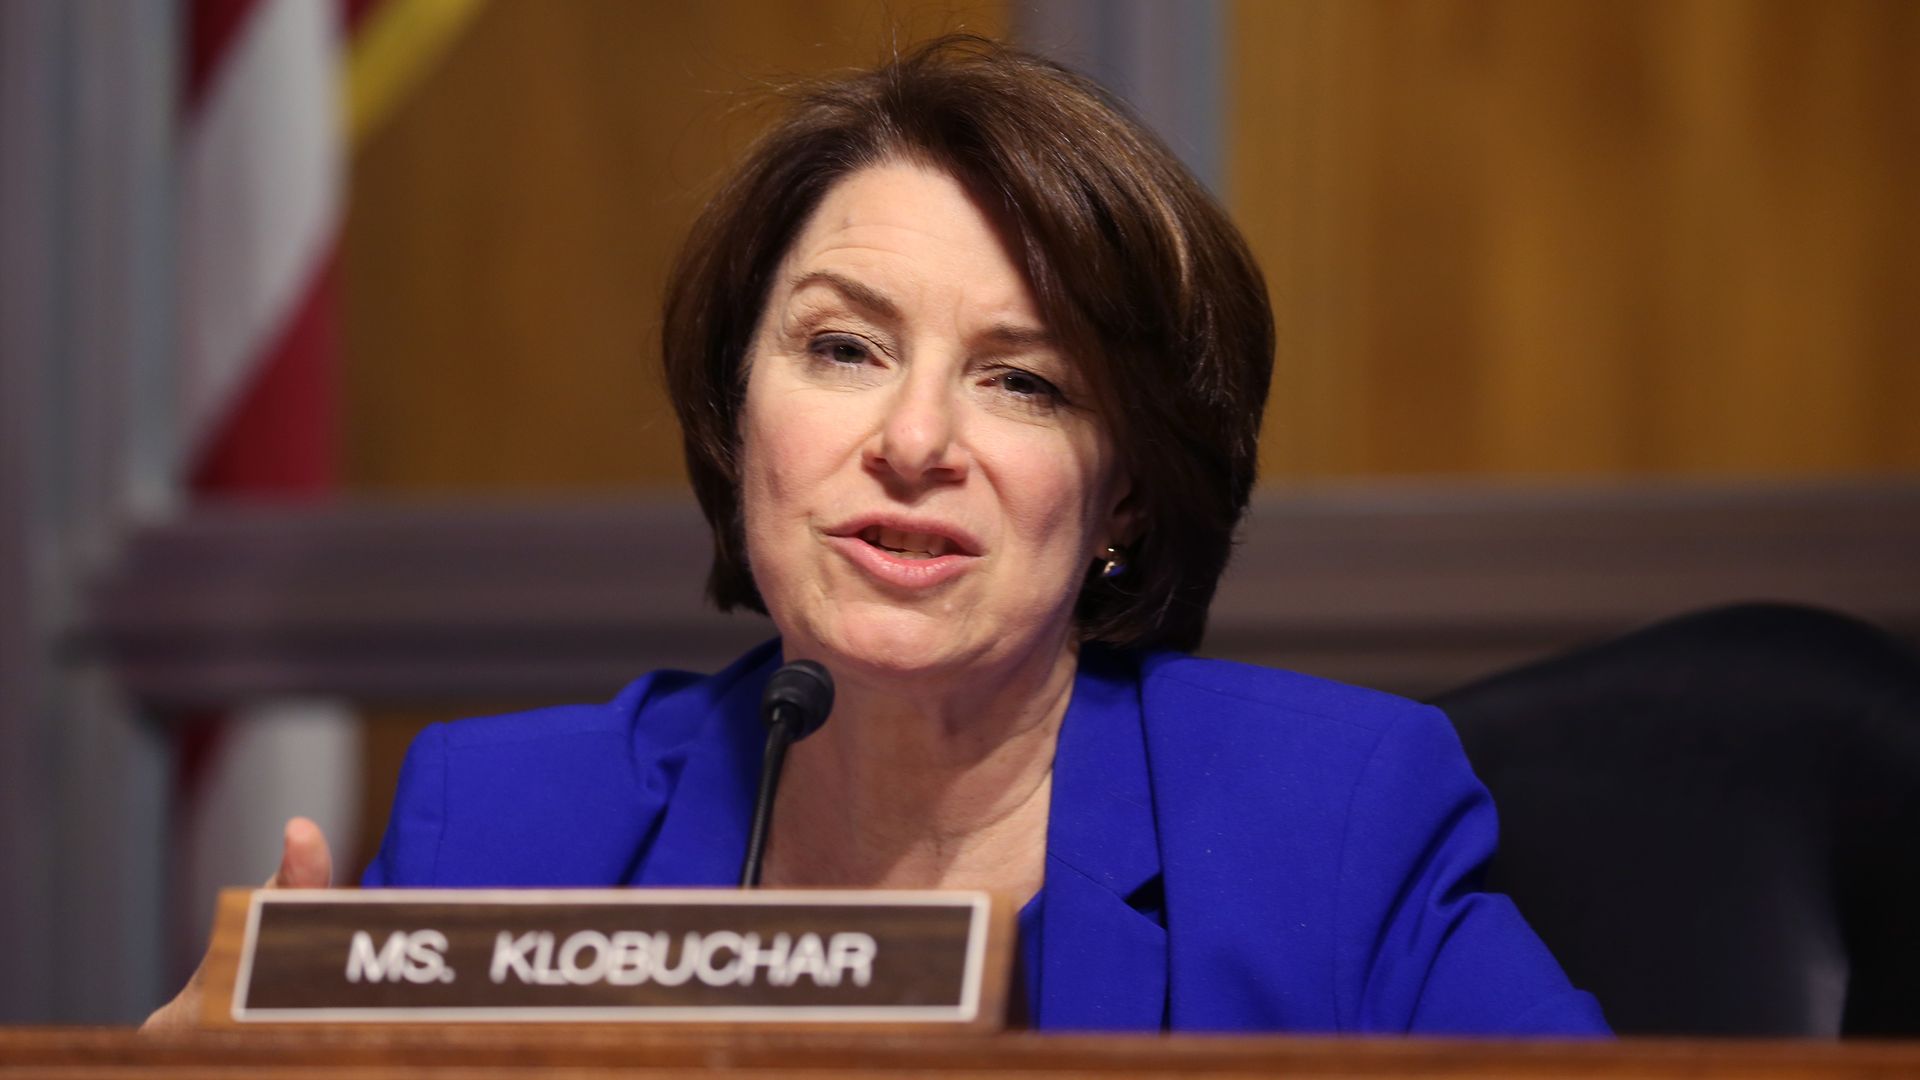 U.S. Sen. Amy Klobuchar (D-MN) asks questions during a hearing of the Senate Judiciary Subcommittee